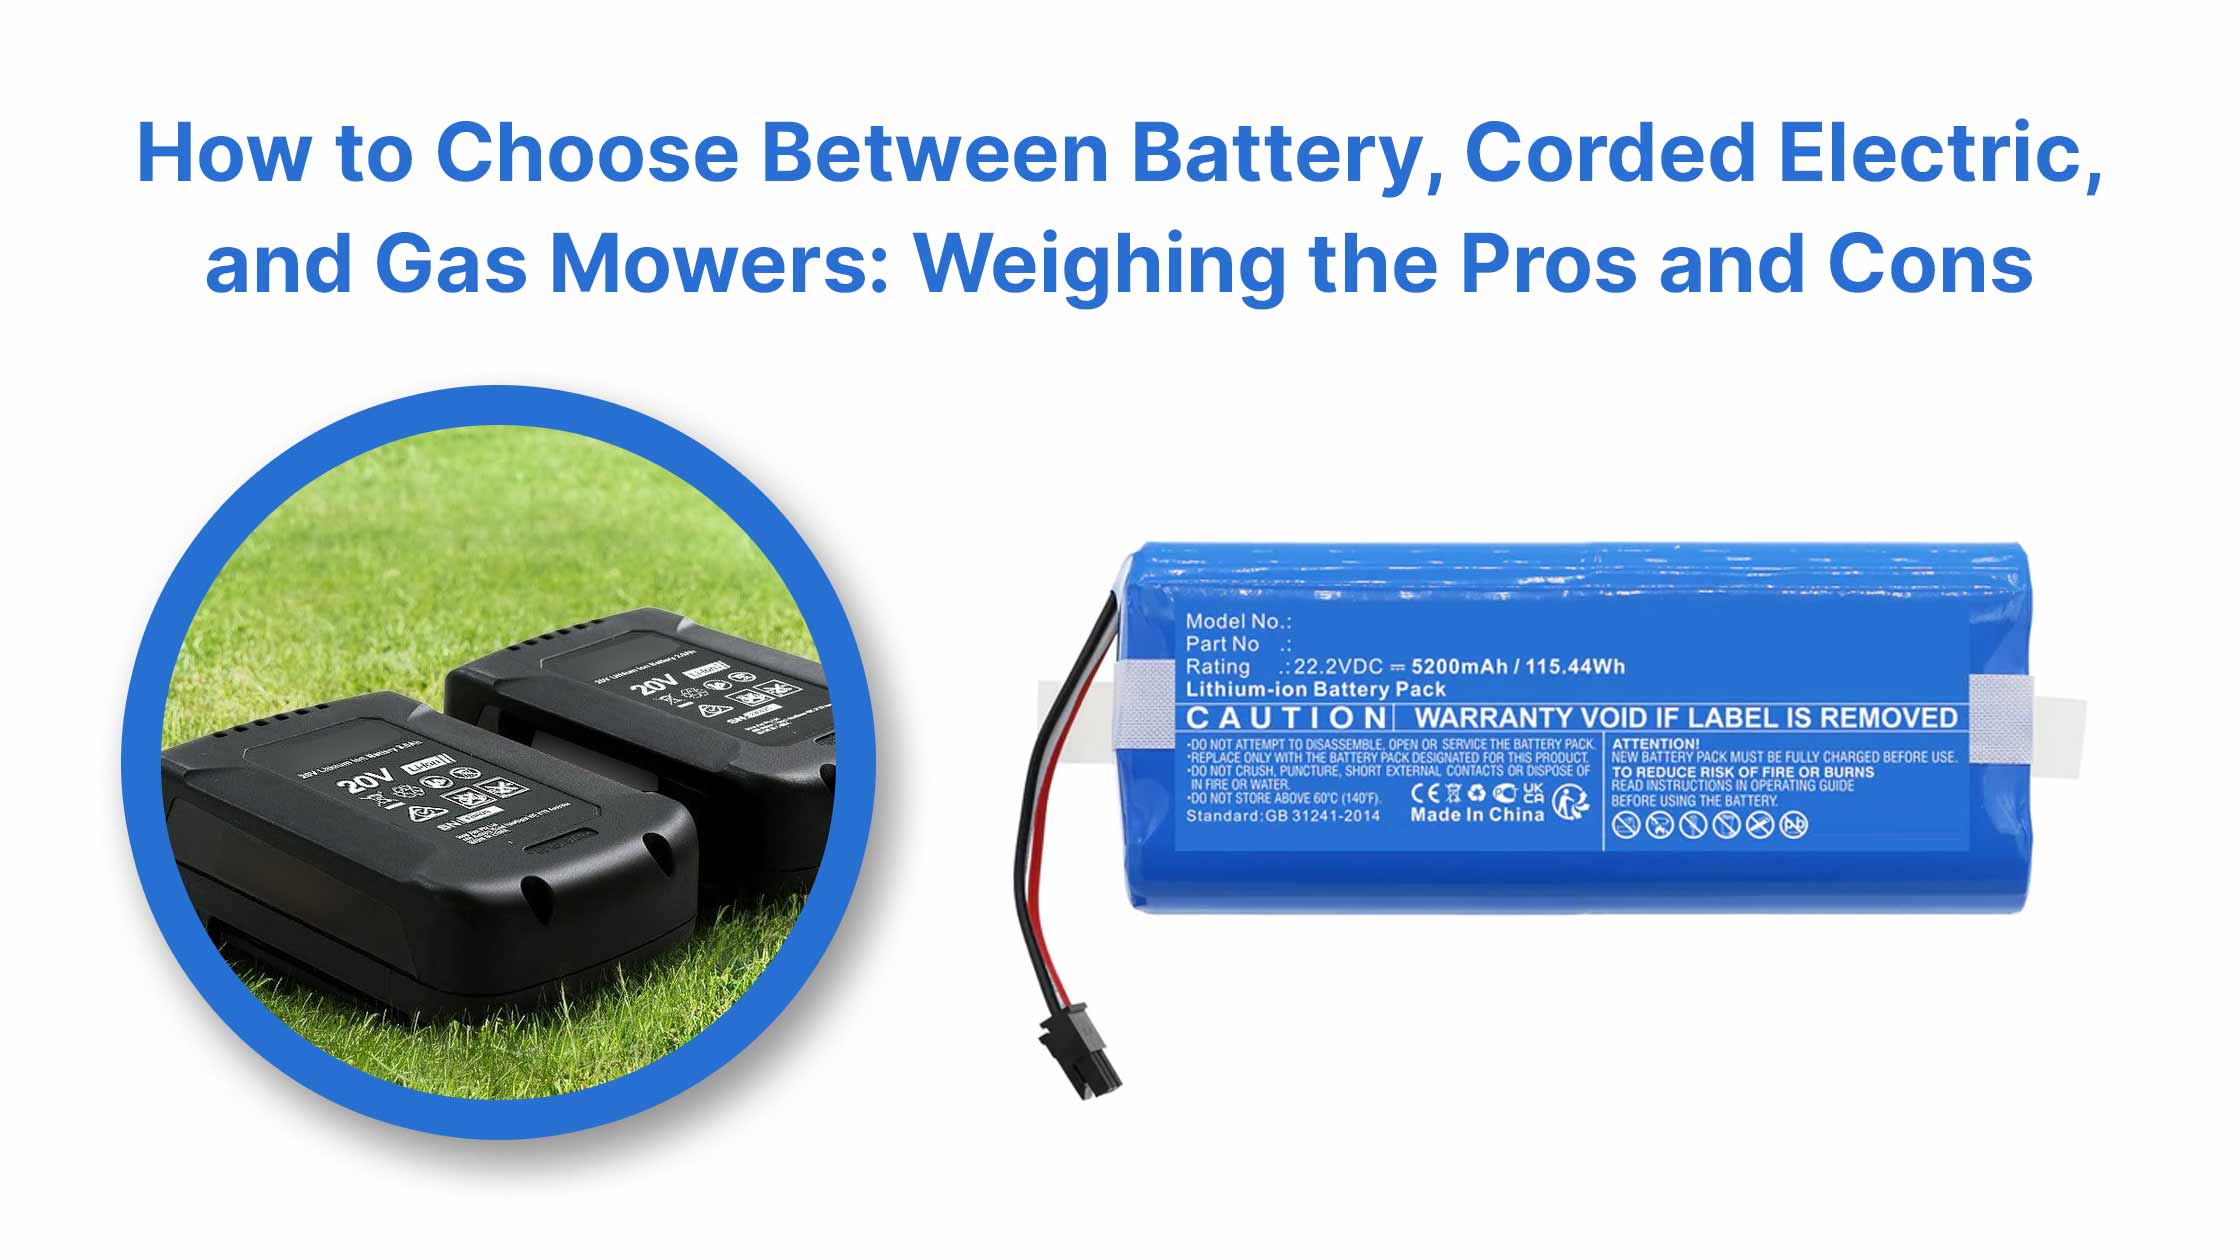 lawn mower lithium battery factory redway, What Is The Problem With Battery-powered Mowers?